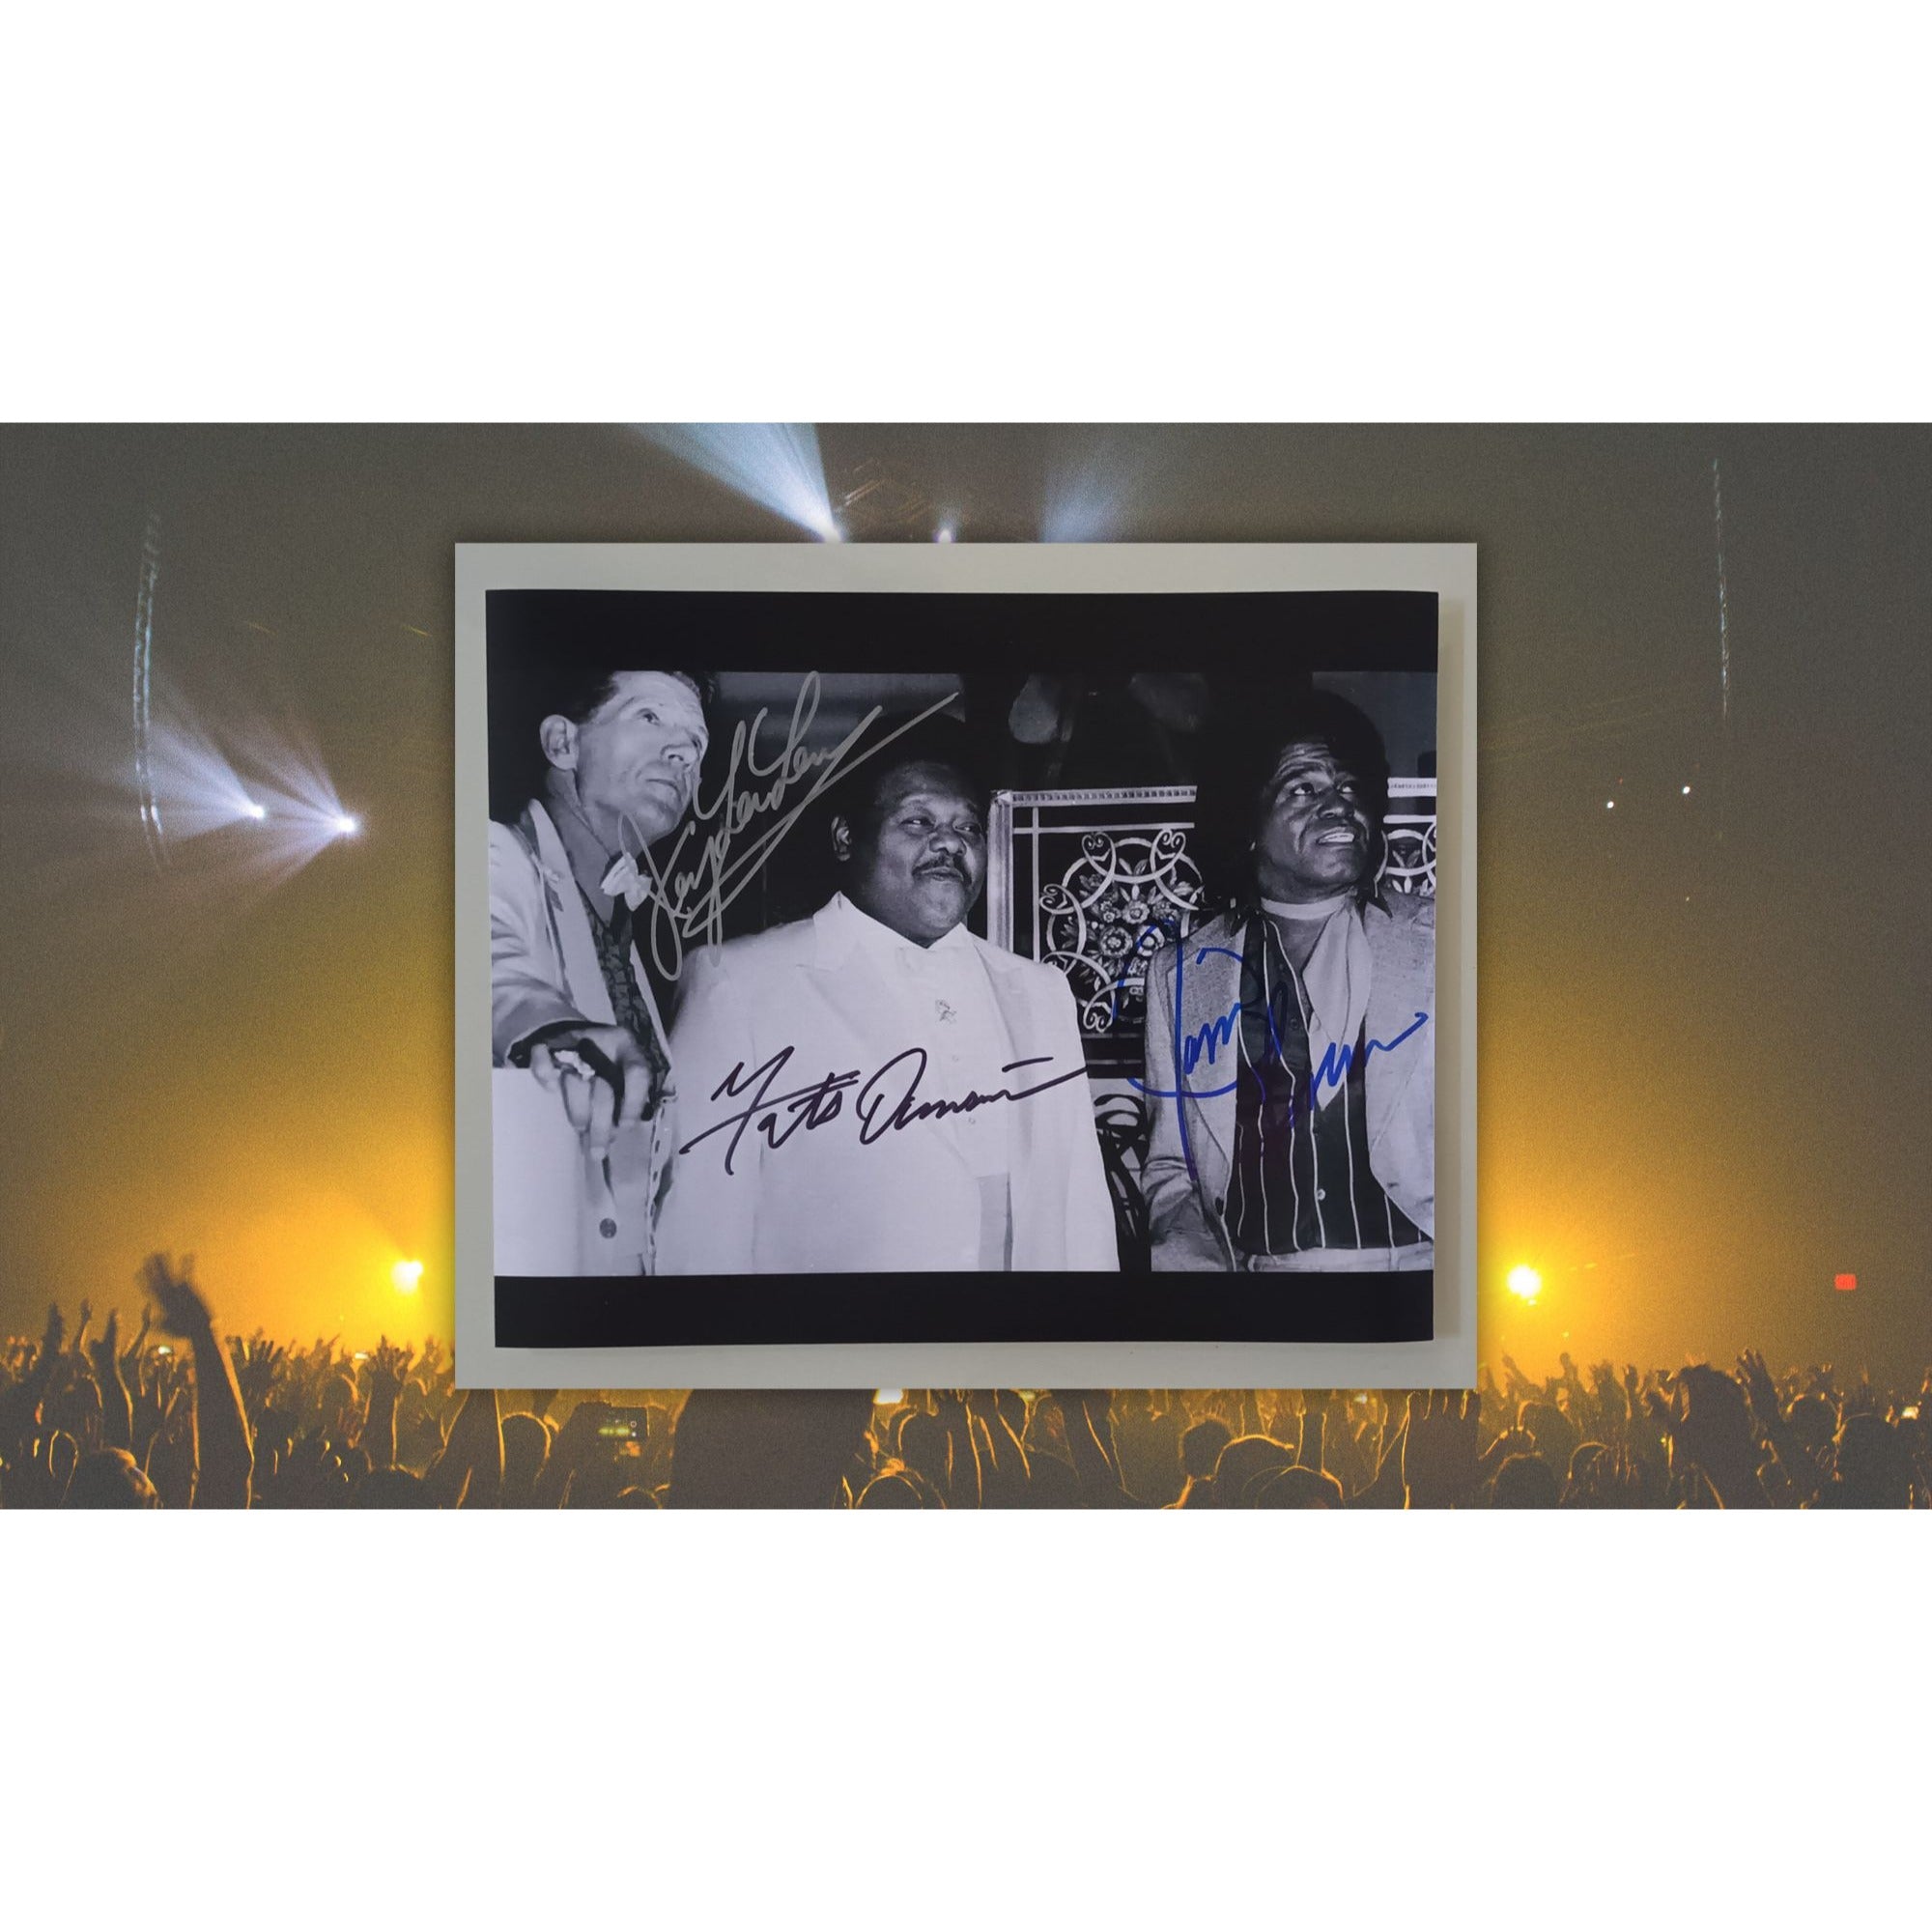 Jerry Lee Lewis Fats Domino and James Brown 8x10 photograph signed with proof